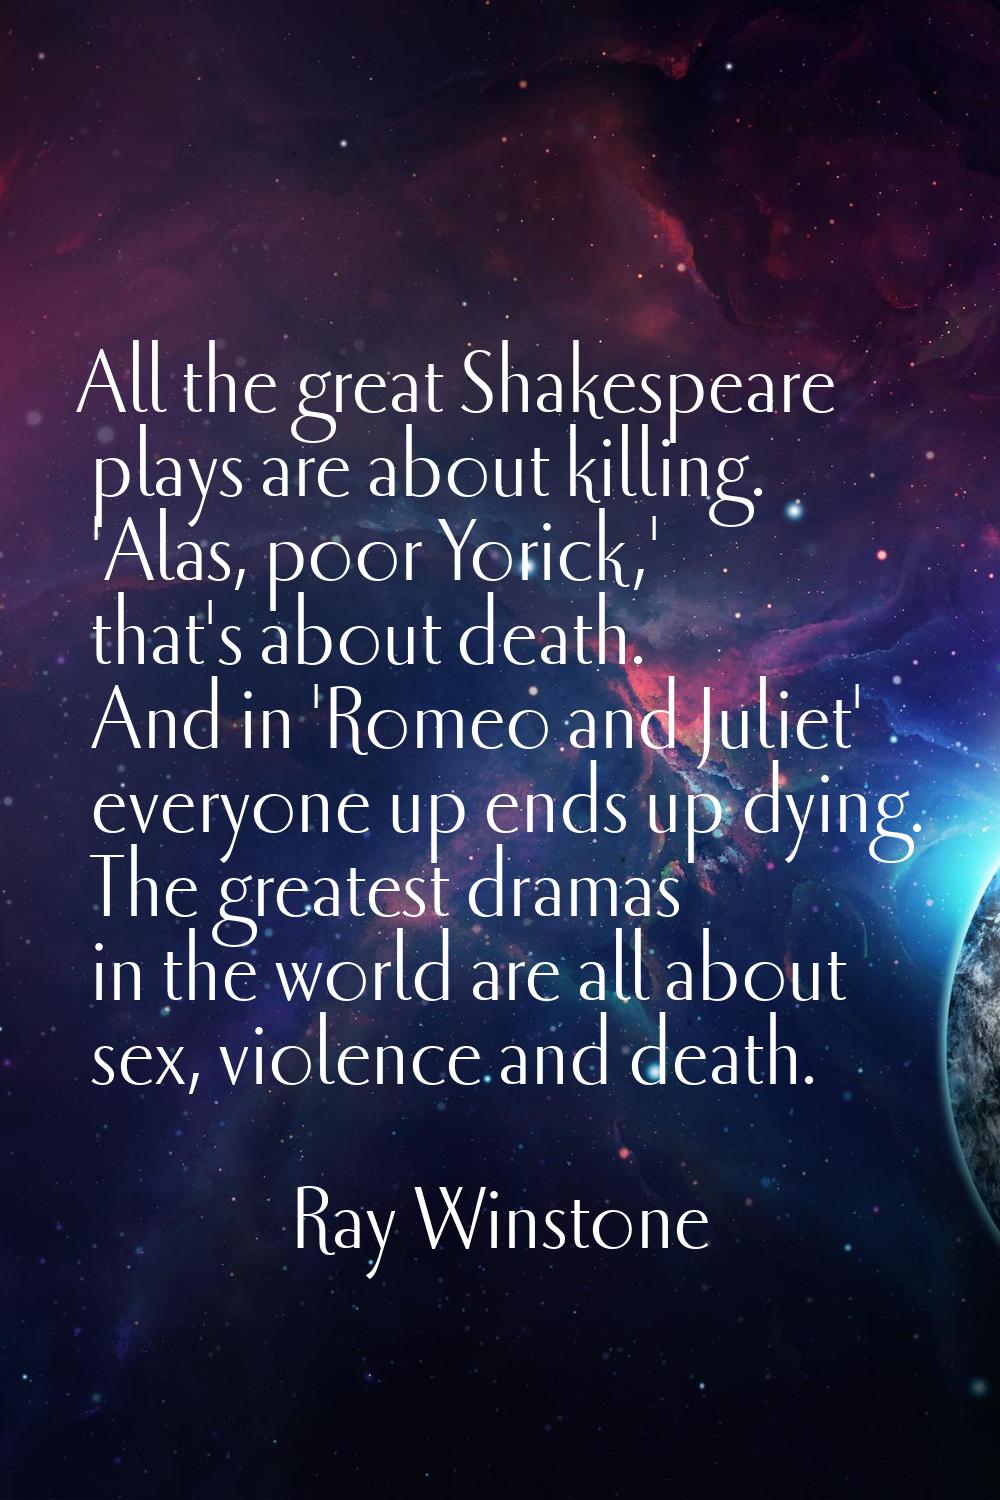 All the great Shakespeare plays are about killing. 'Alas, poor Yorick,' that's about death. And in 